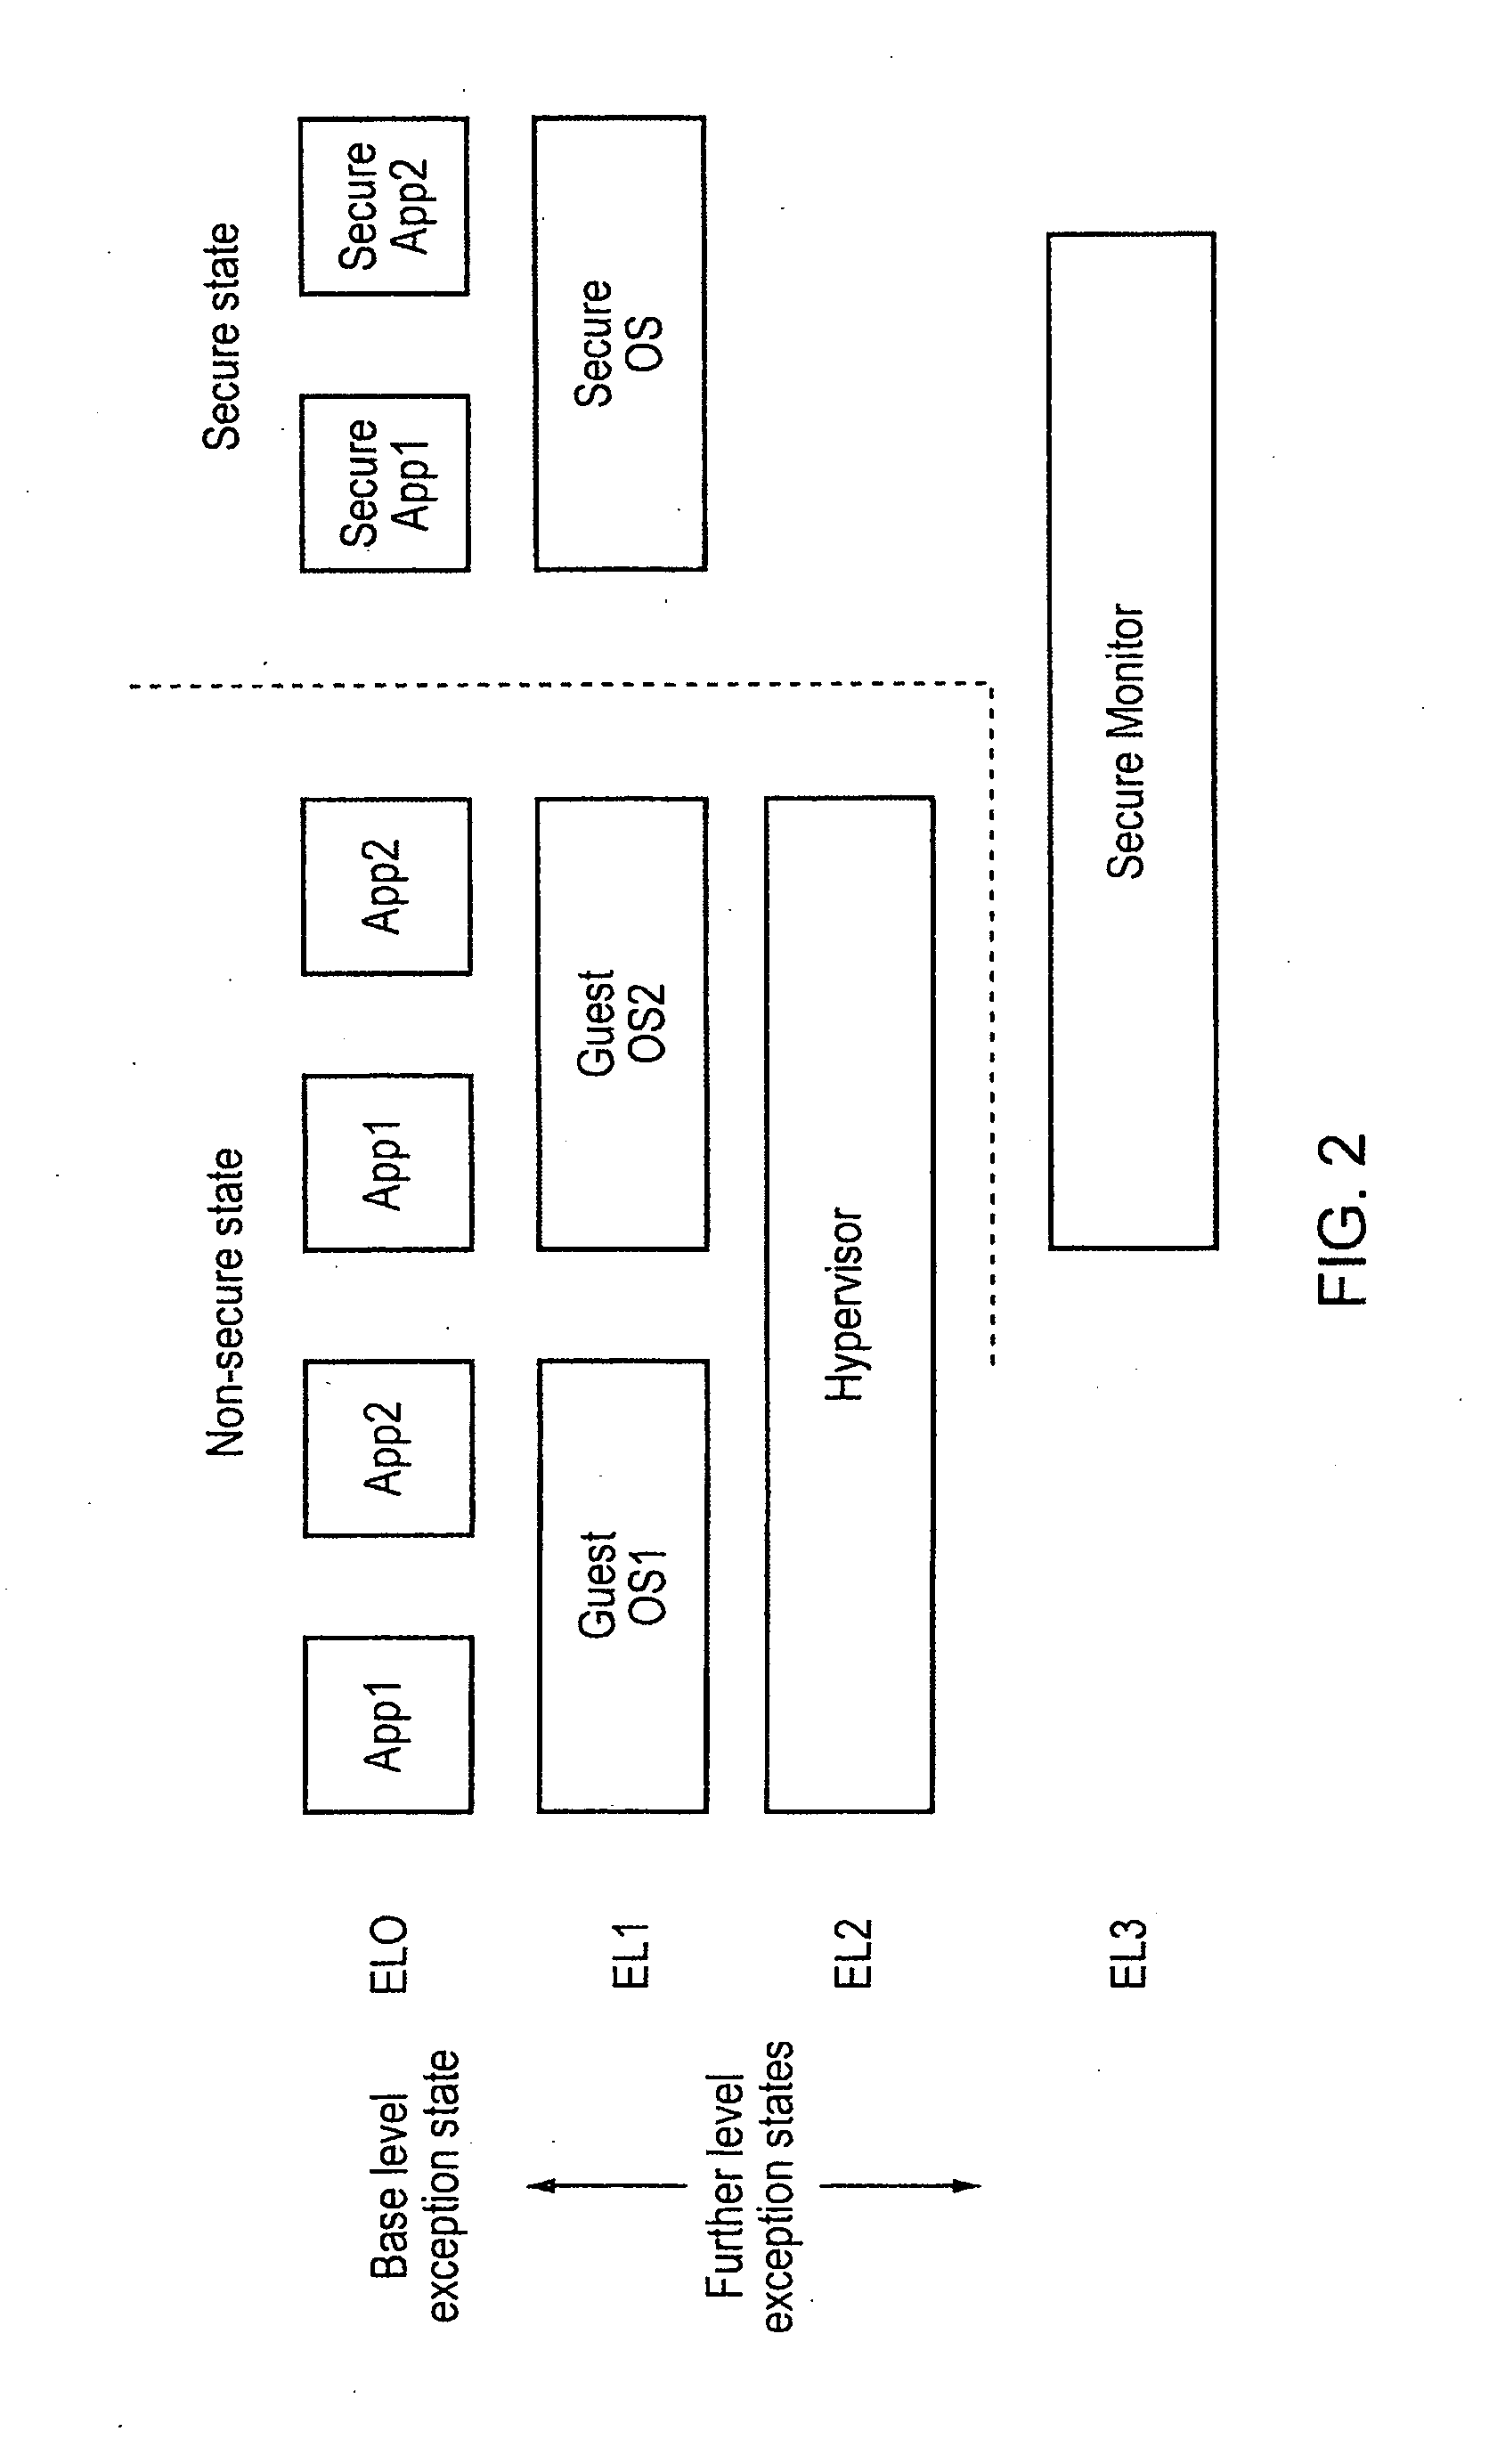 Apparatus and method for handling exception events